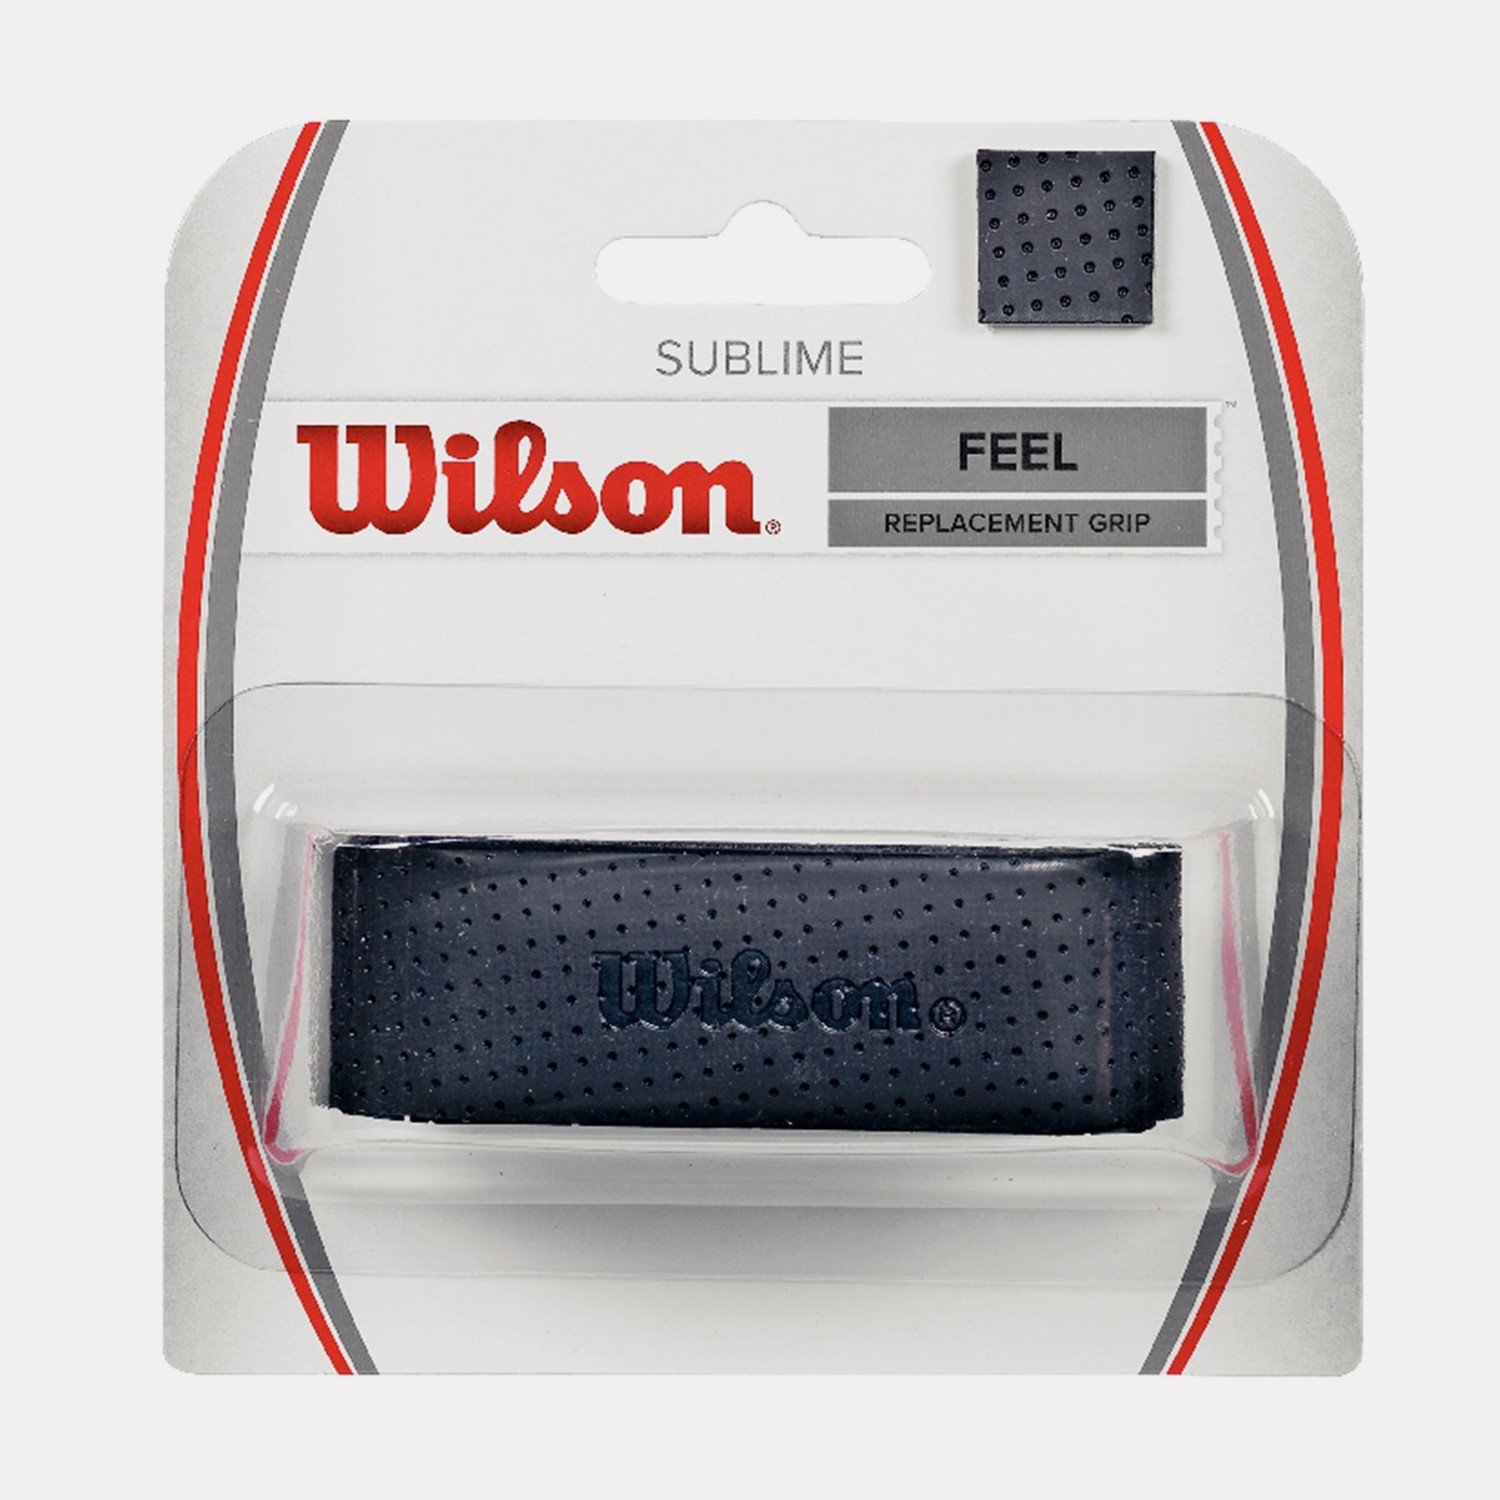 Wilson Sublime Replacement Grip (9000079877_1469)